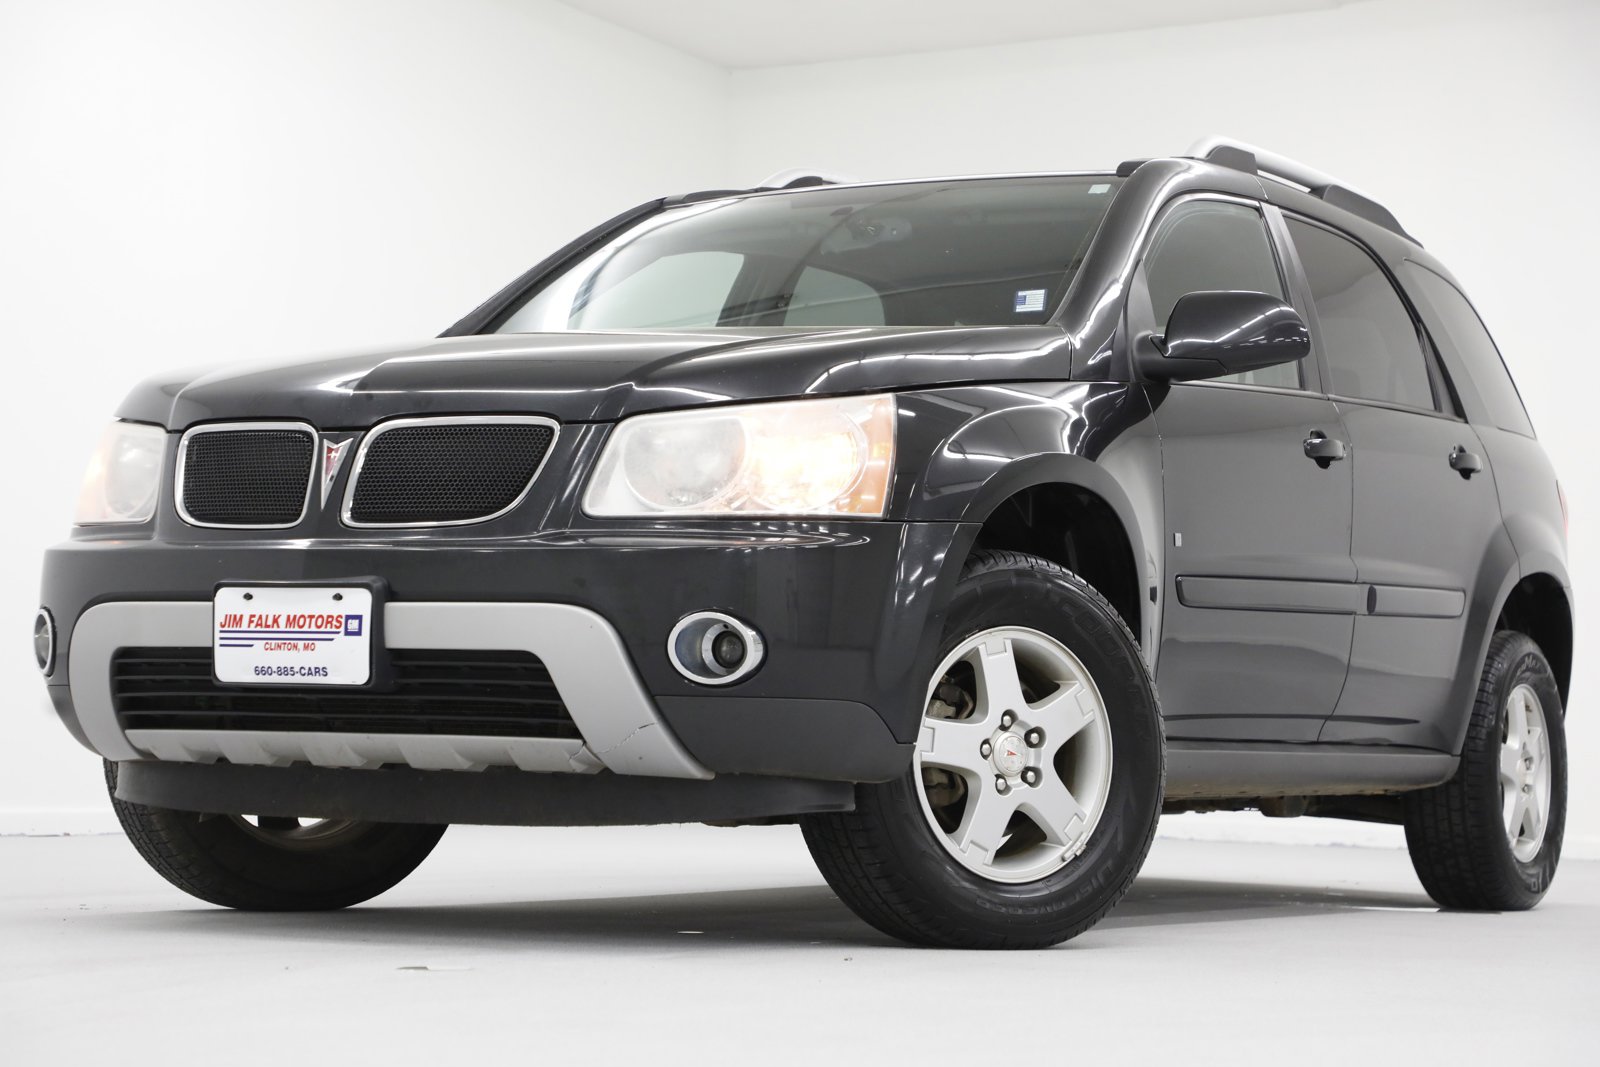 Used Pontiac Torrent's nationwide for sale - MotorCloud